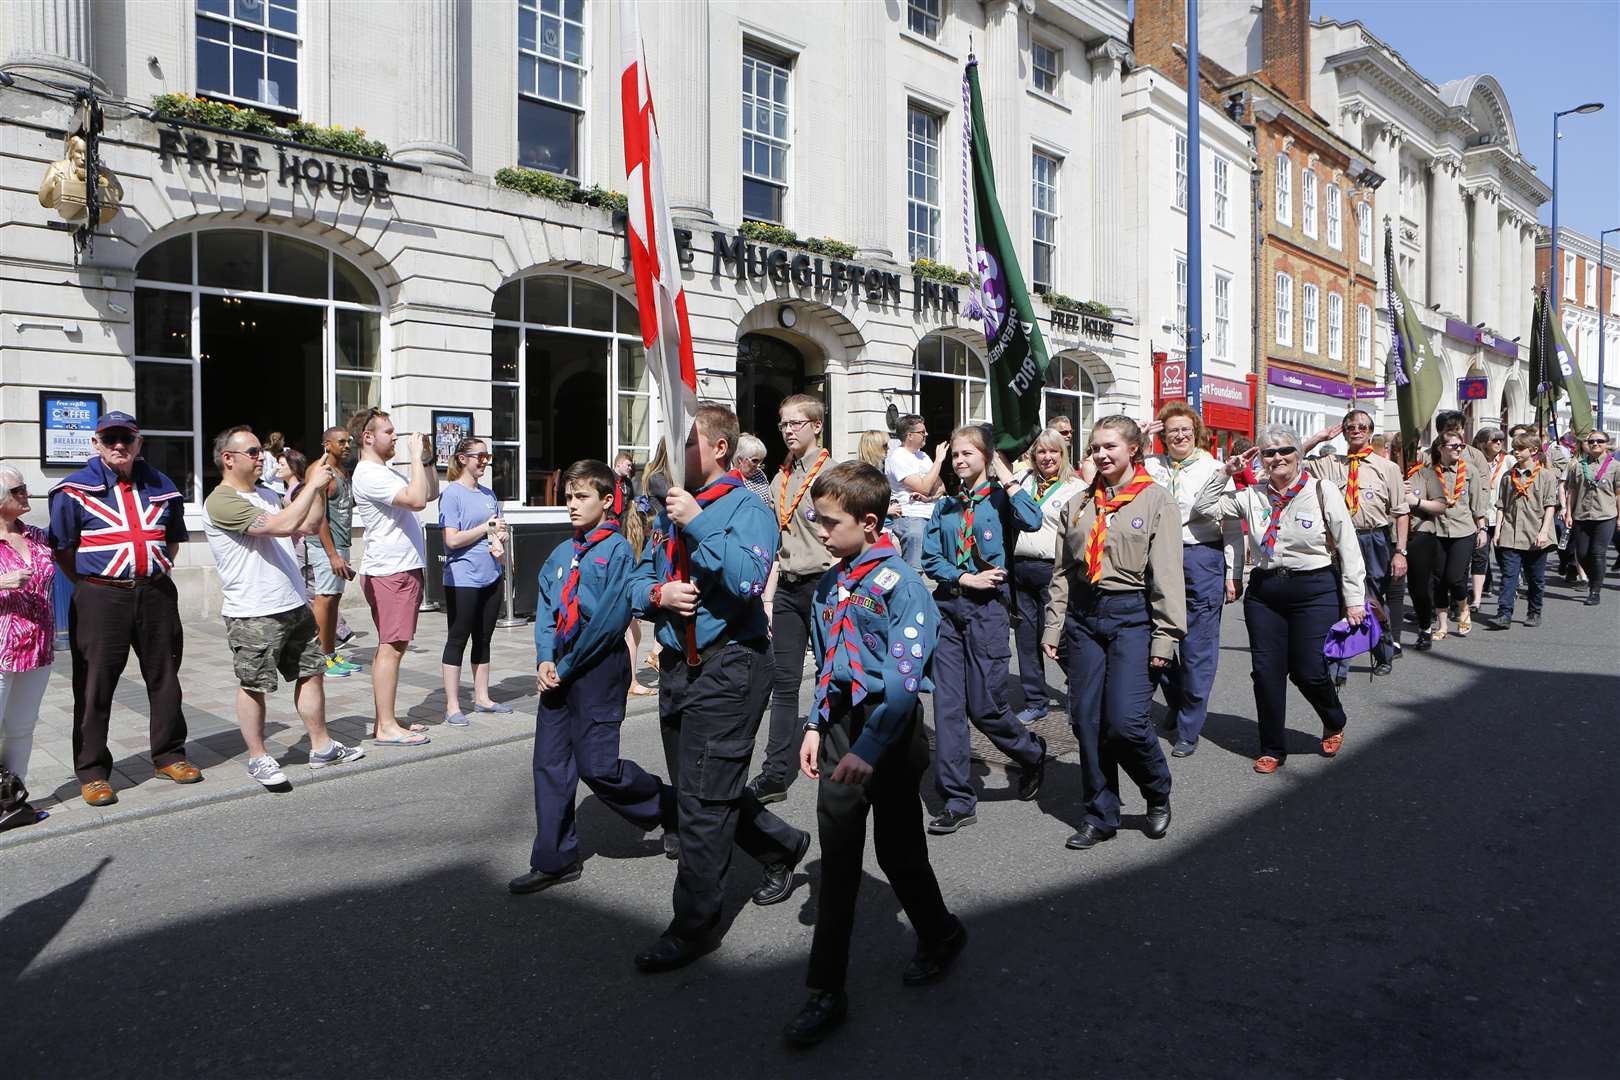 Around 800 scouts marched through the county town for the celebrations